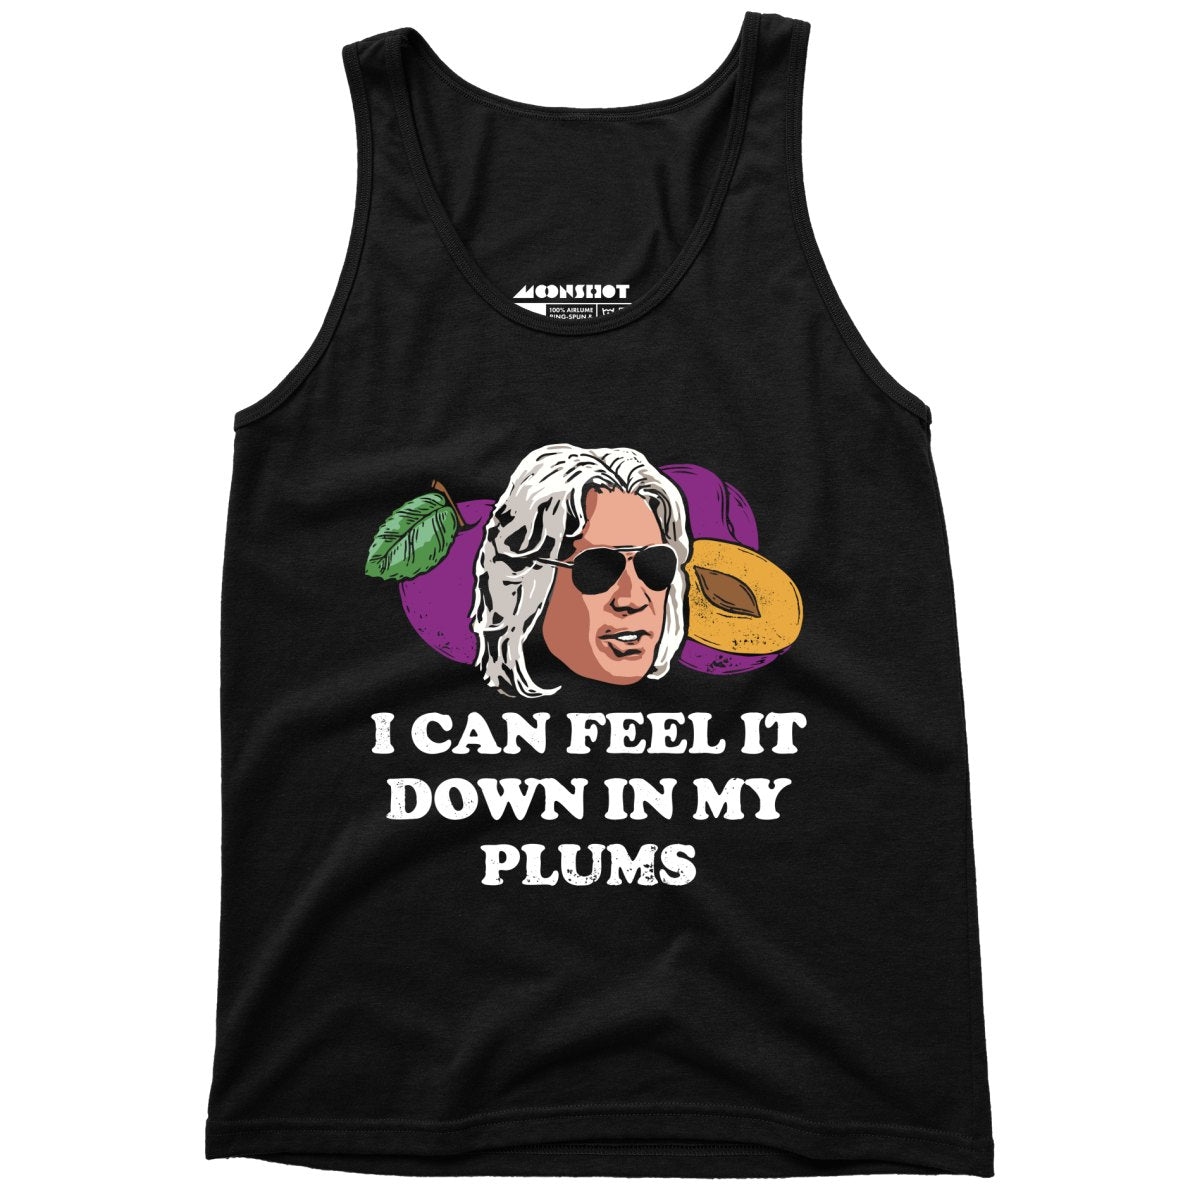 I Can Feel it Down in My Plums - Unisex Tank Top